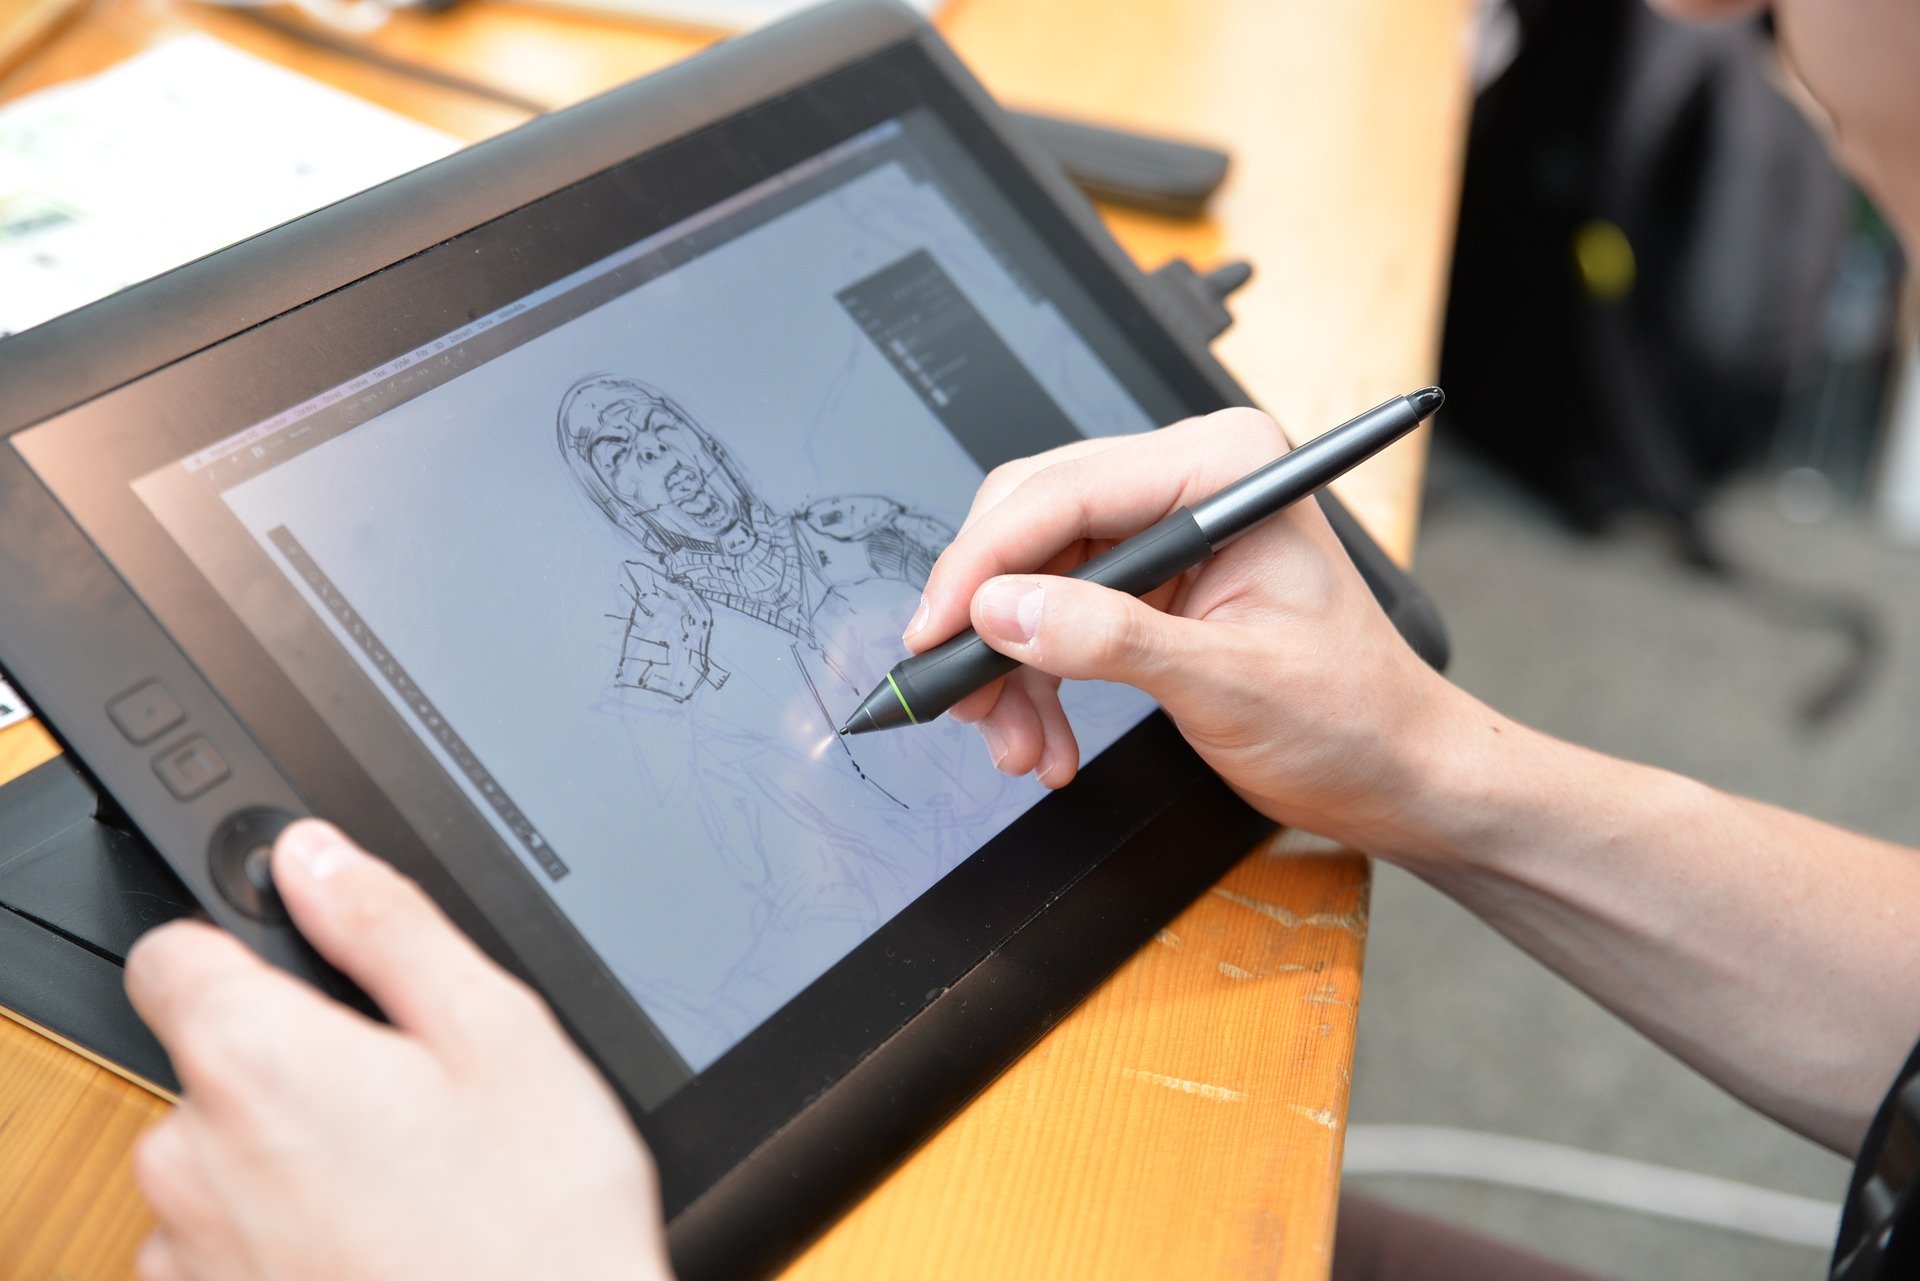 11 Best Drawing Apps to Make Digital Art On Android and iOS - Geekflare